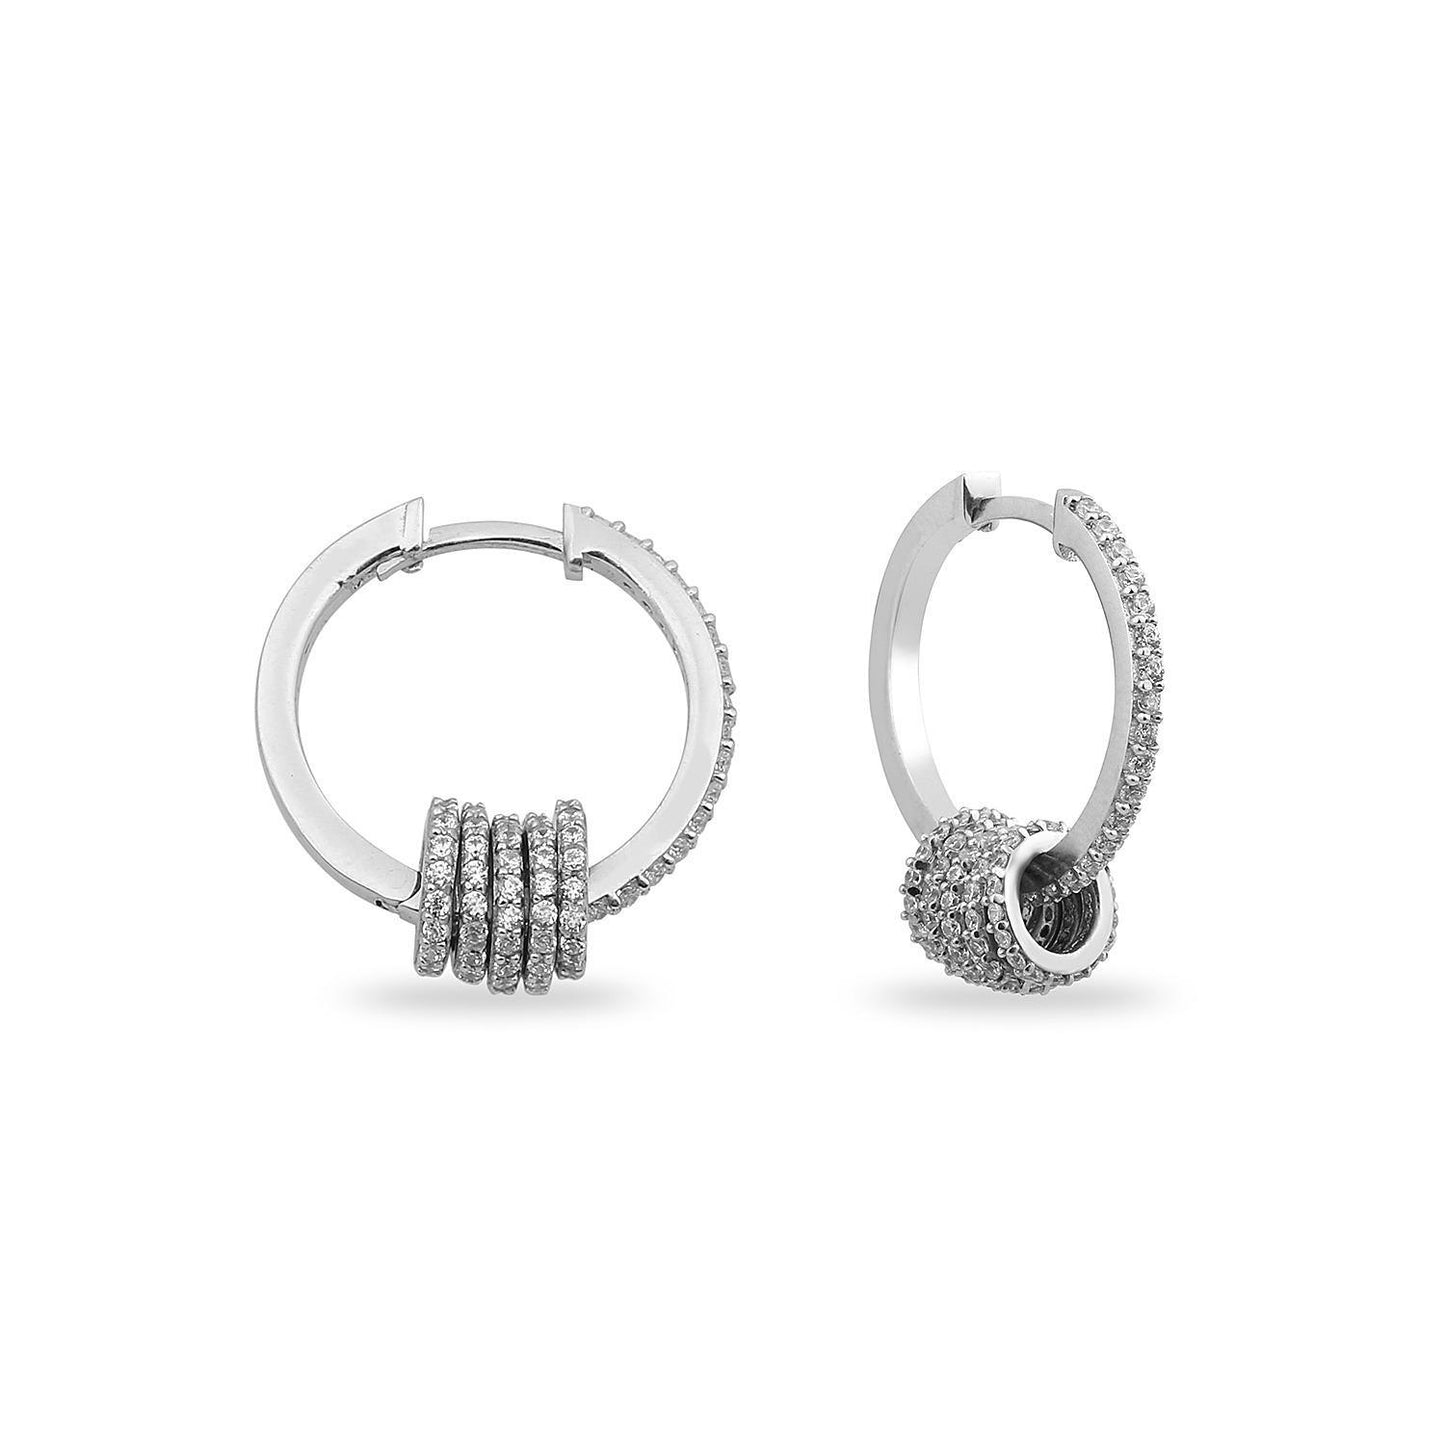 Crystal Ring Charms Mini Hoops JEWELRY The Sis Kiss